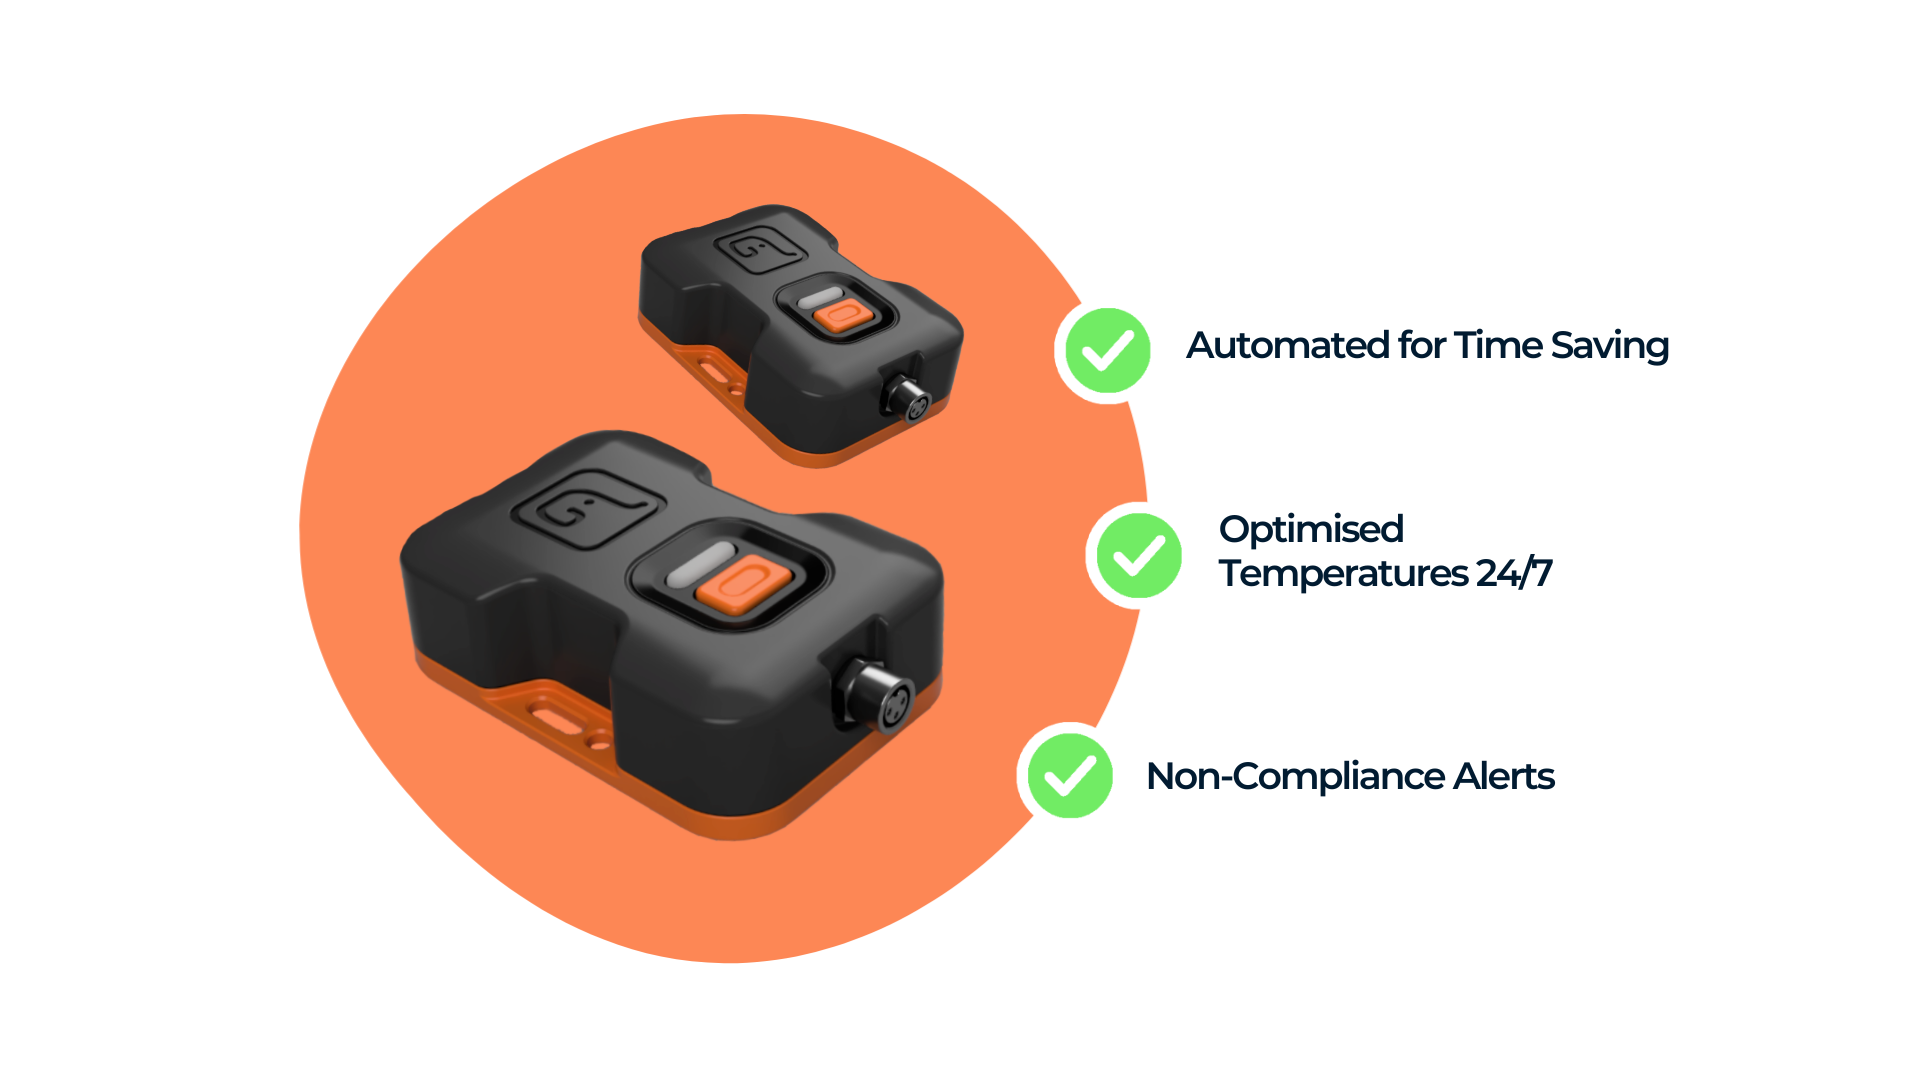 2 of our temperature monitoring devices on an orange background with 3 bullet points: Automated for time saving, Optimised temperatures 24/7, Non-Compliance alerts